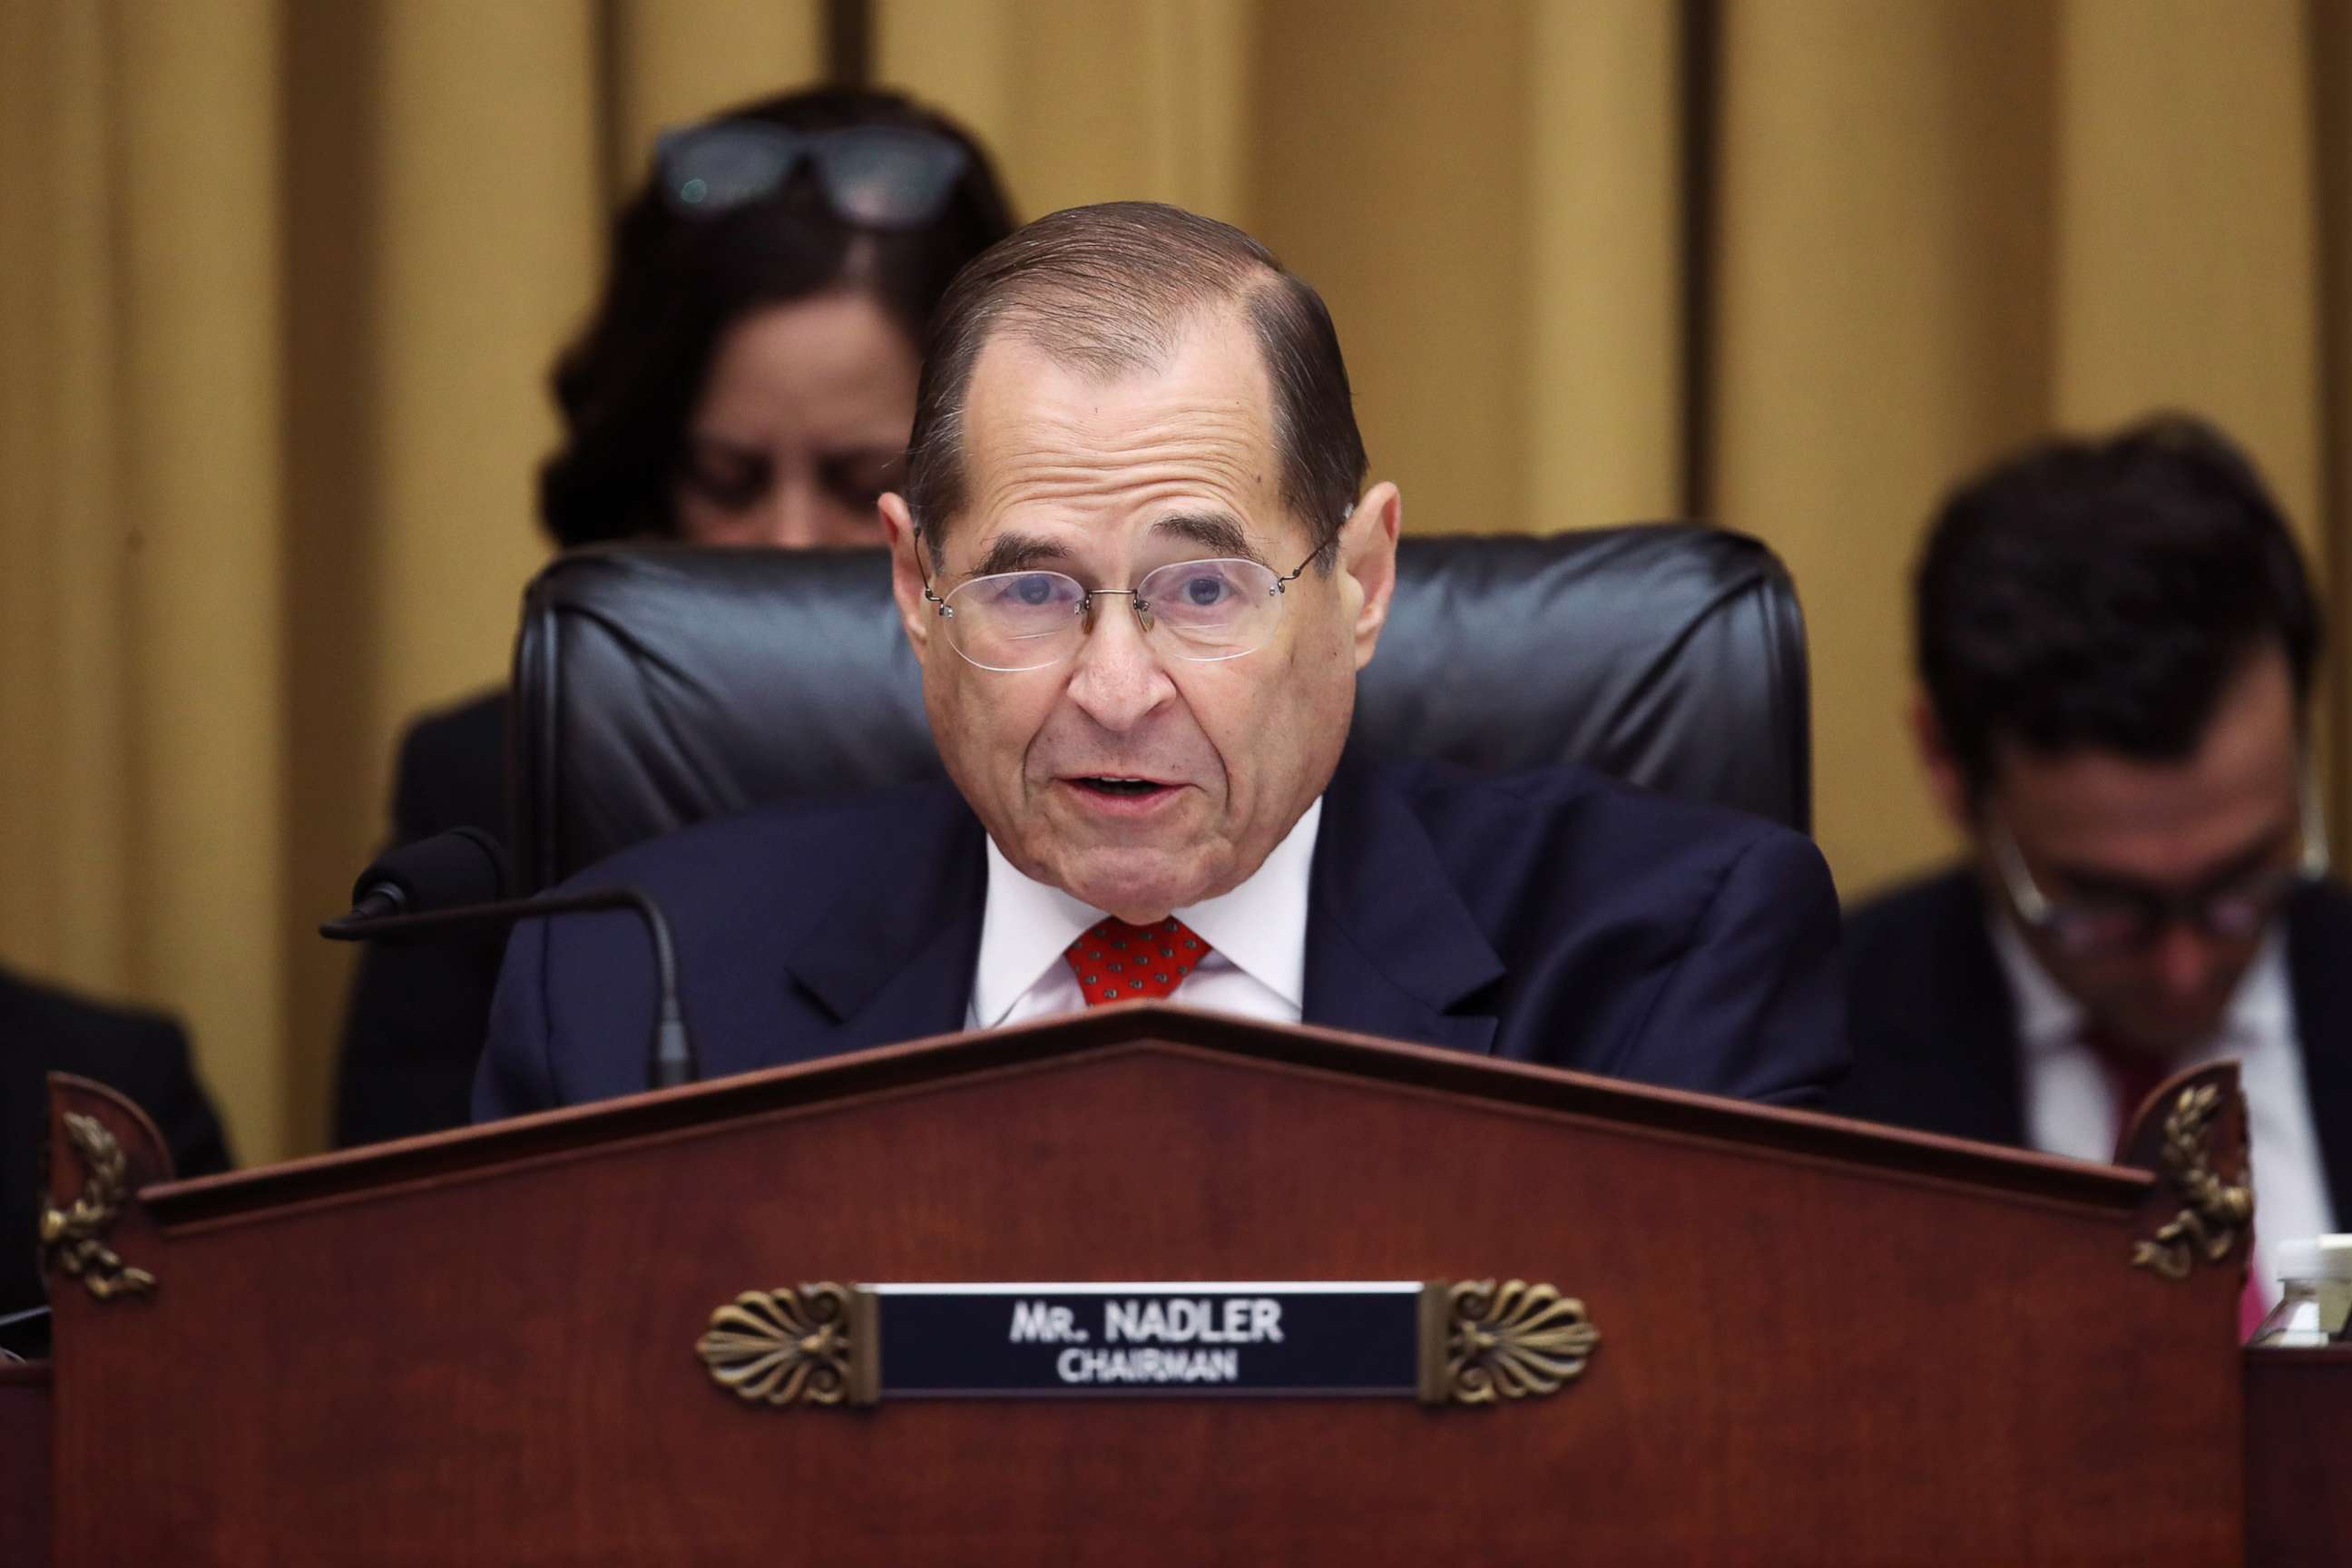 PHOTO: Chairman of the House Judiciary Committee Rep. Jerry Nadler questions former Special Counsel Robert Mueller in the Rayburn House Office Building, July 24, 2019 in Washington, D.C.